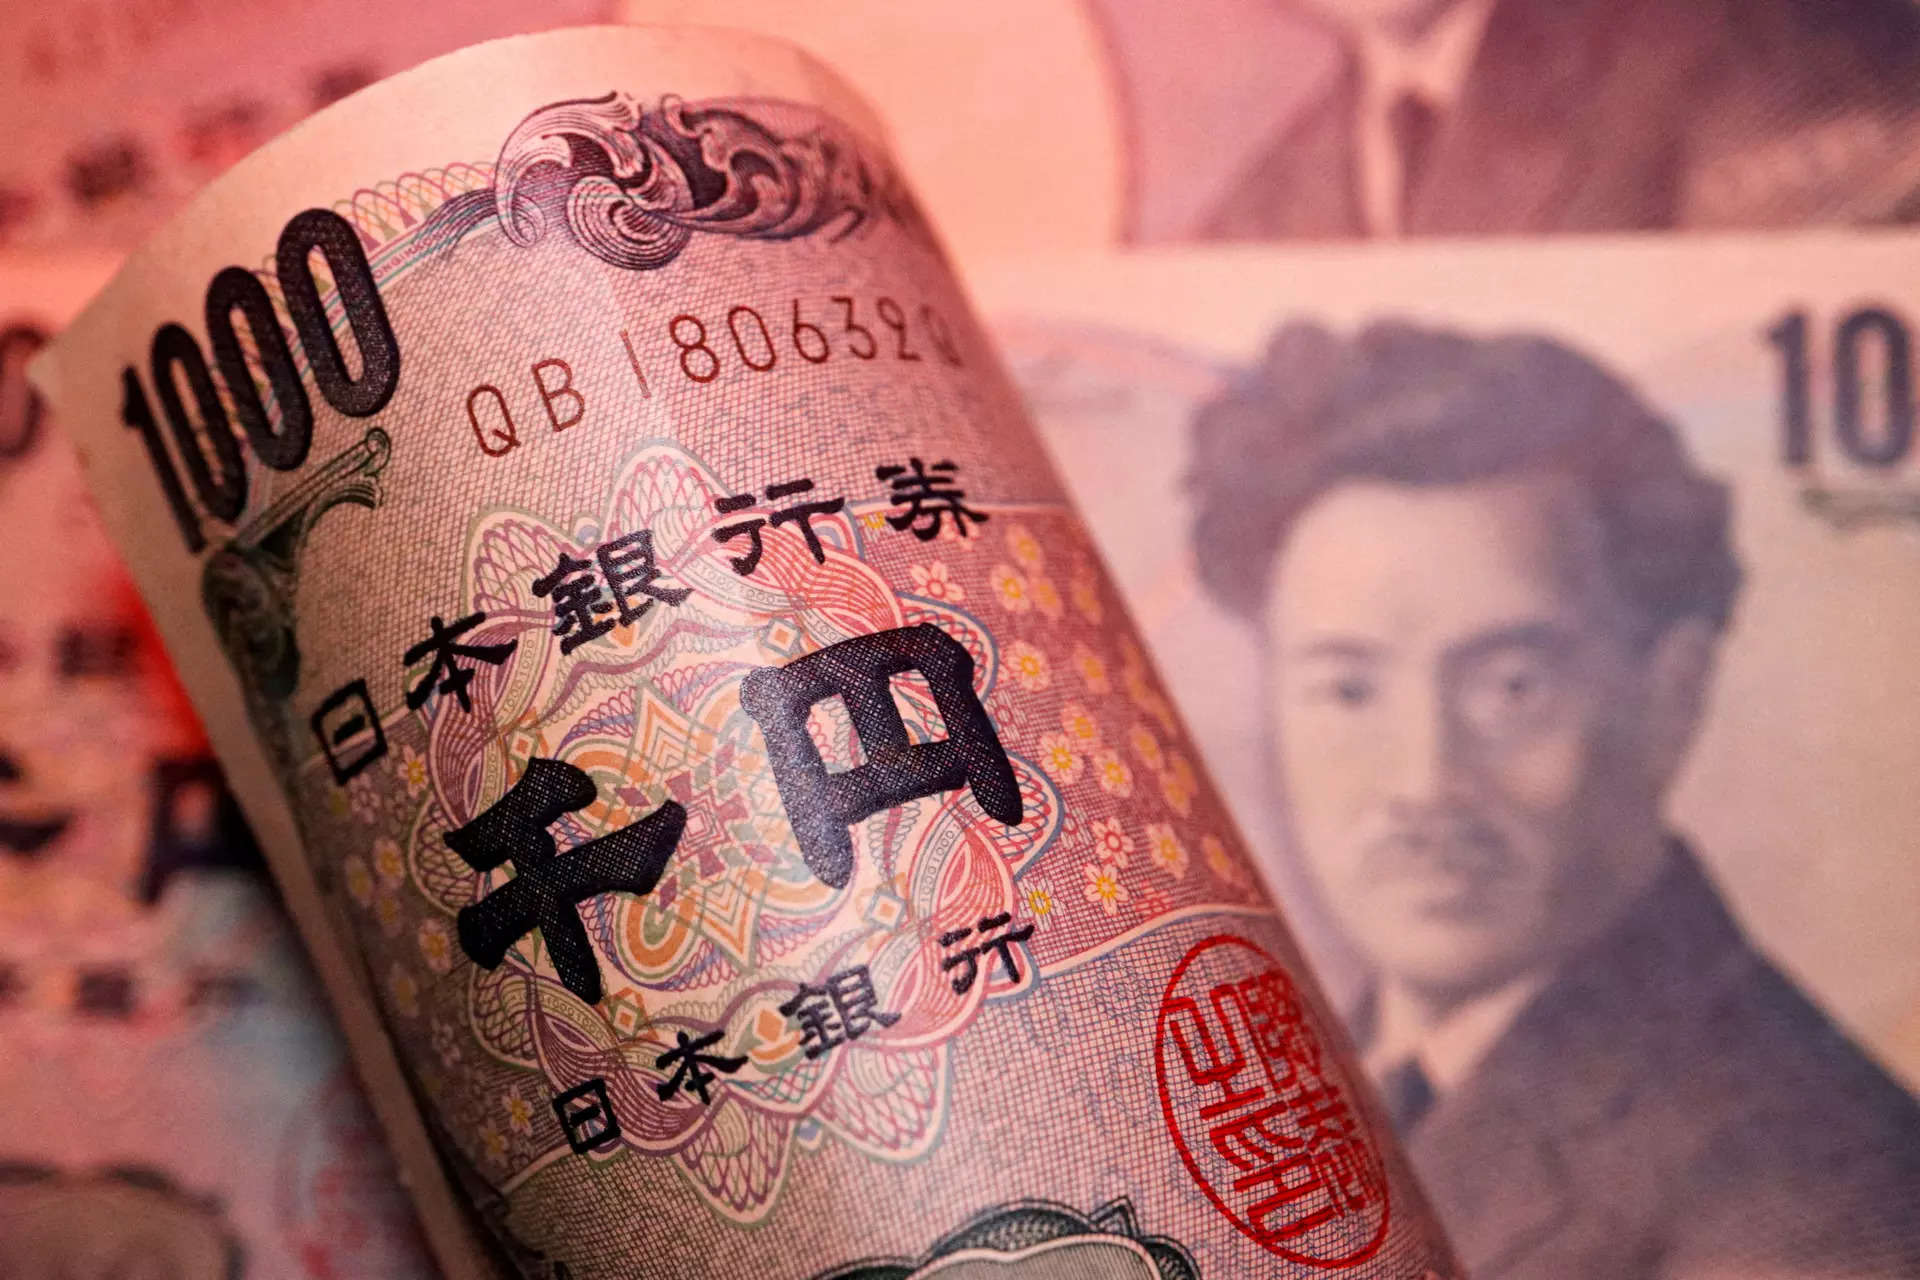 JGB yields rise as global politics add to pressure from yen 